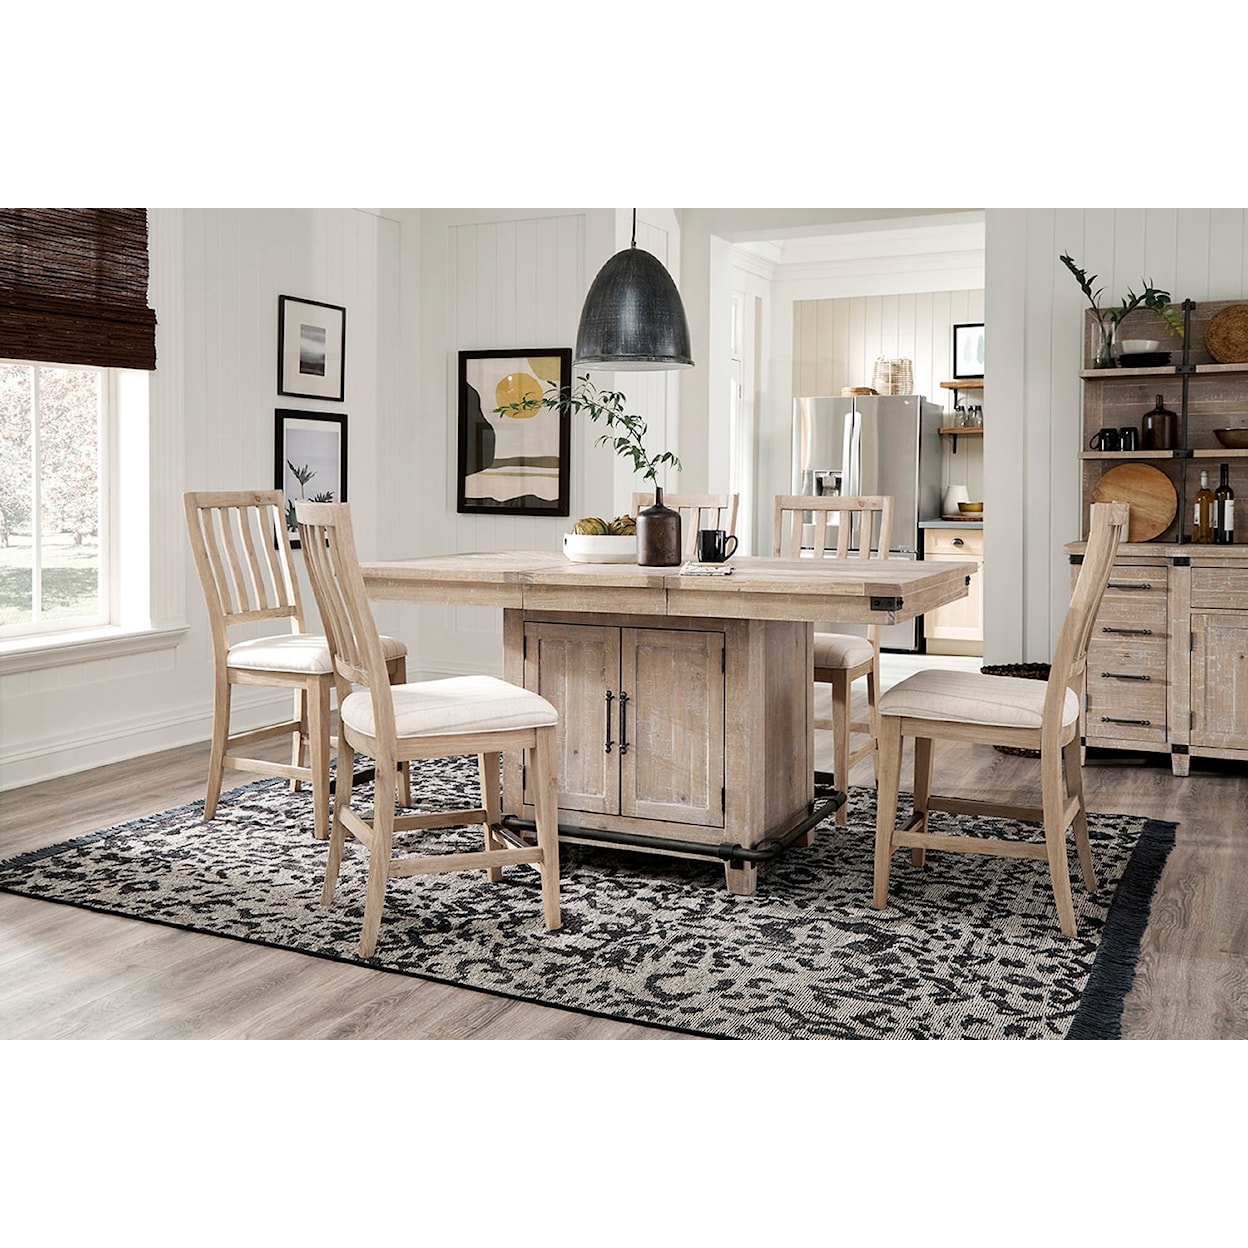 Aspenhome Foundry Extendable Counter-Height Table